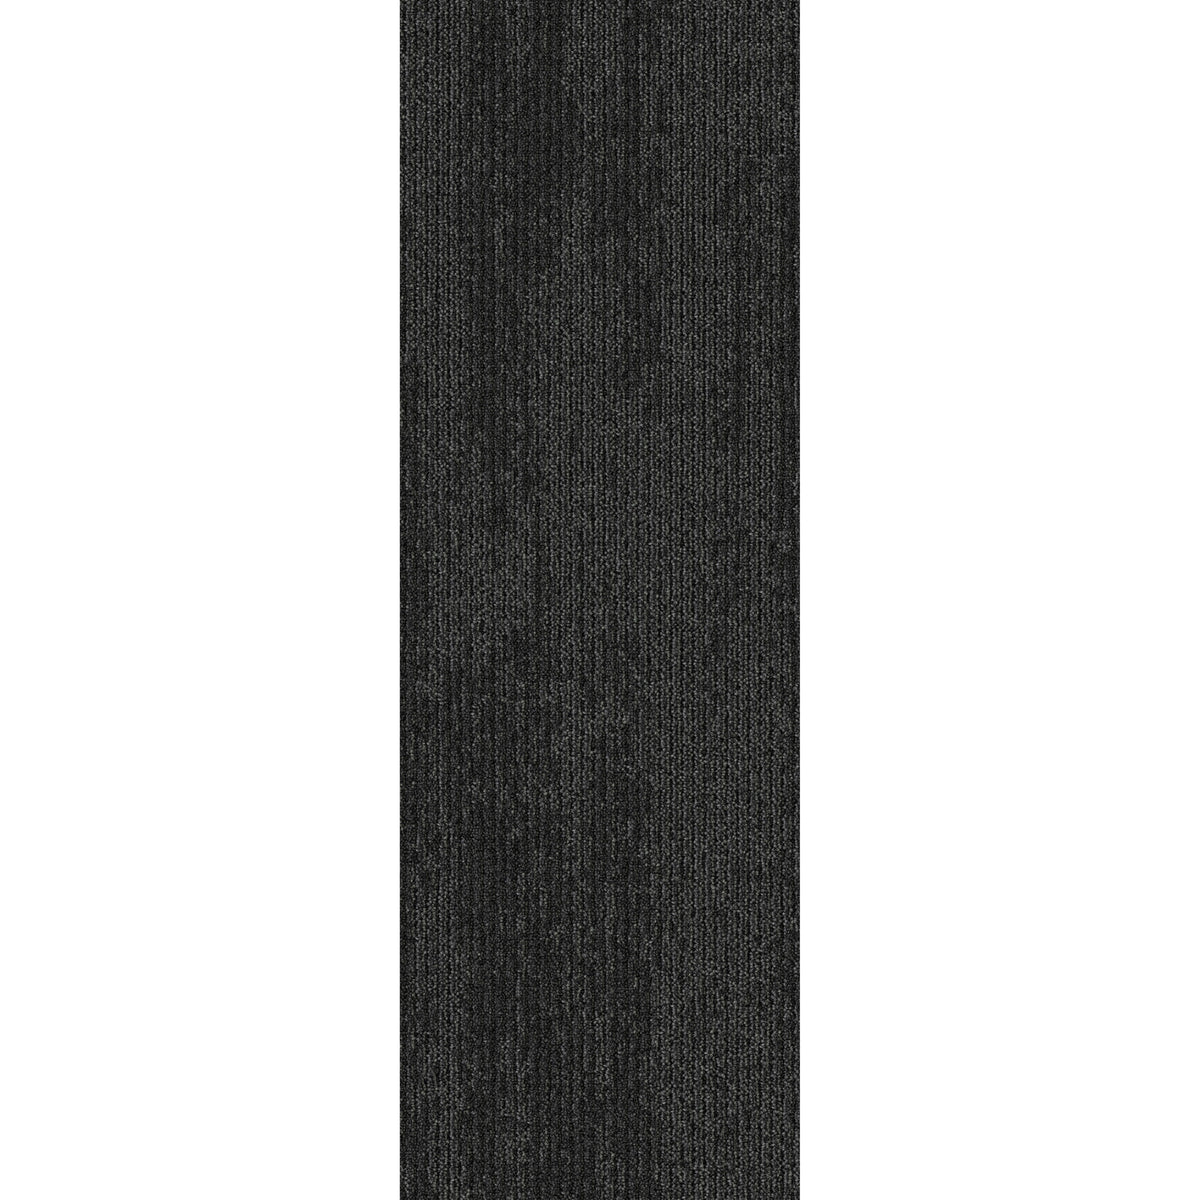 Mohawk Group - Art Style - Shared Path - Carpet Tile - Charcoal